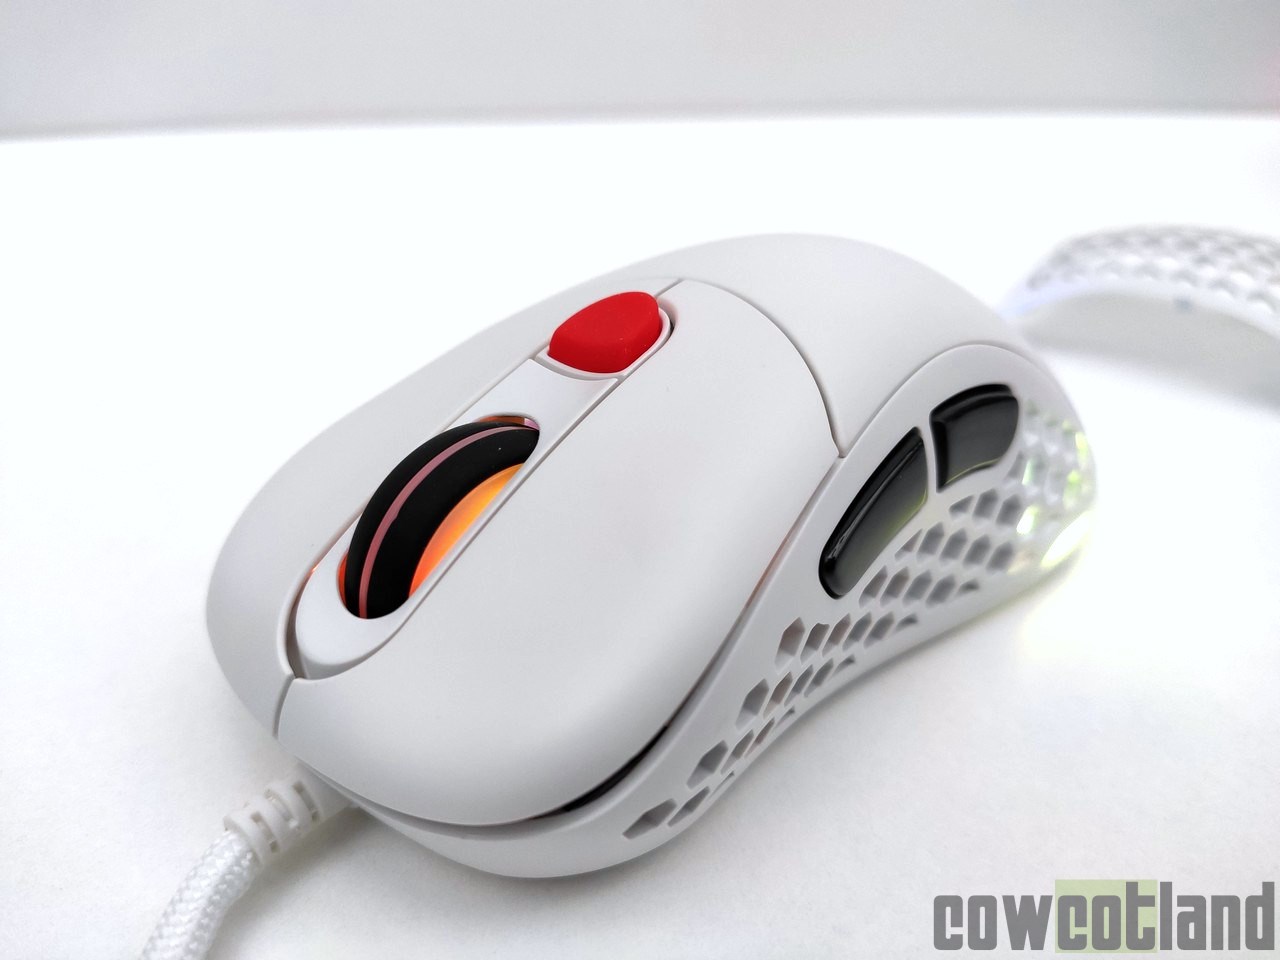 Image 43512, galerie Test souris Gaming Sharkoon Light 200 : Zowie-Killer ?